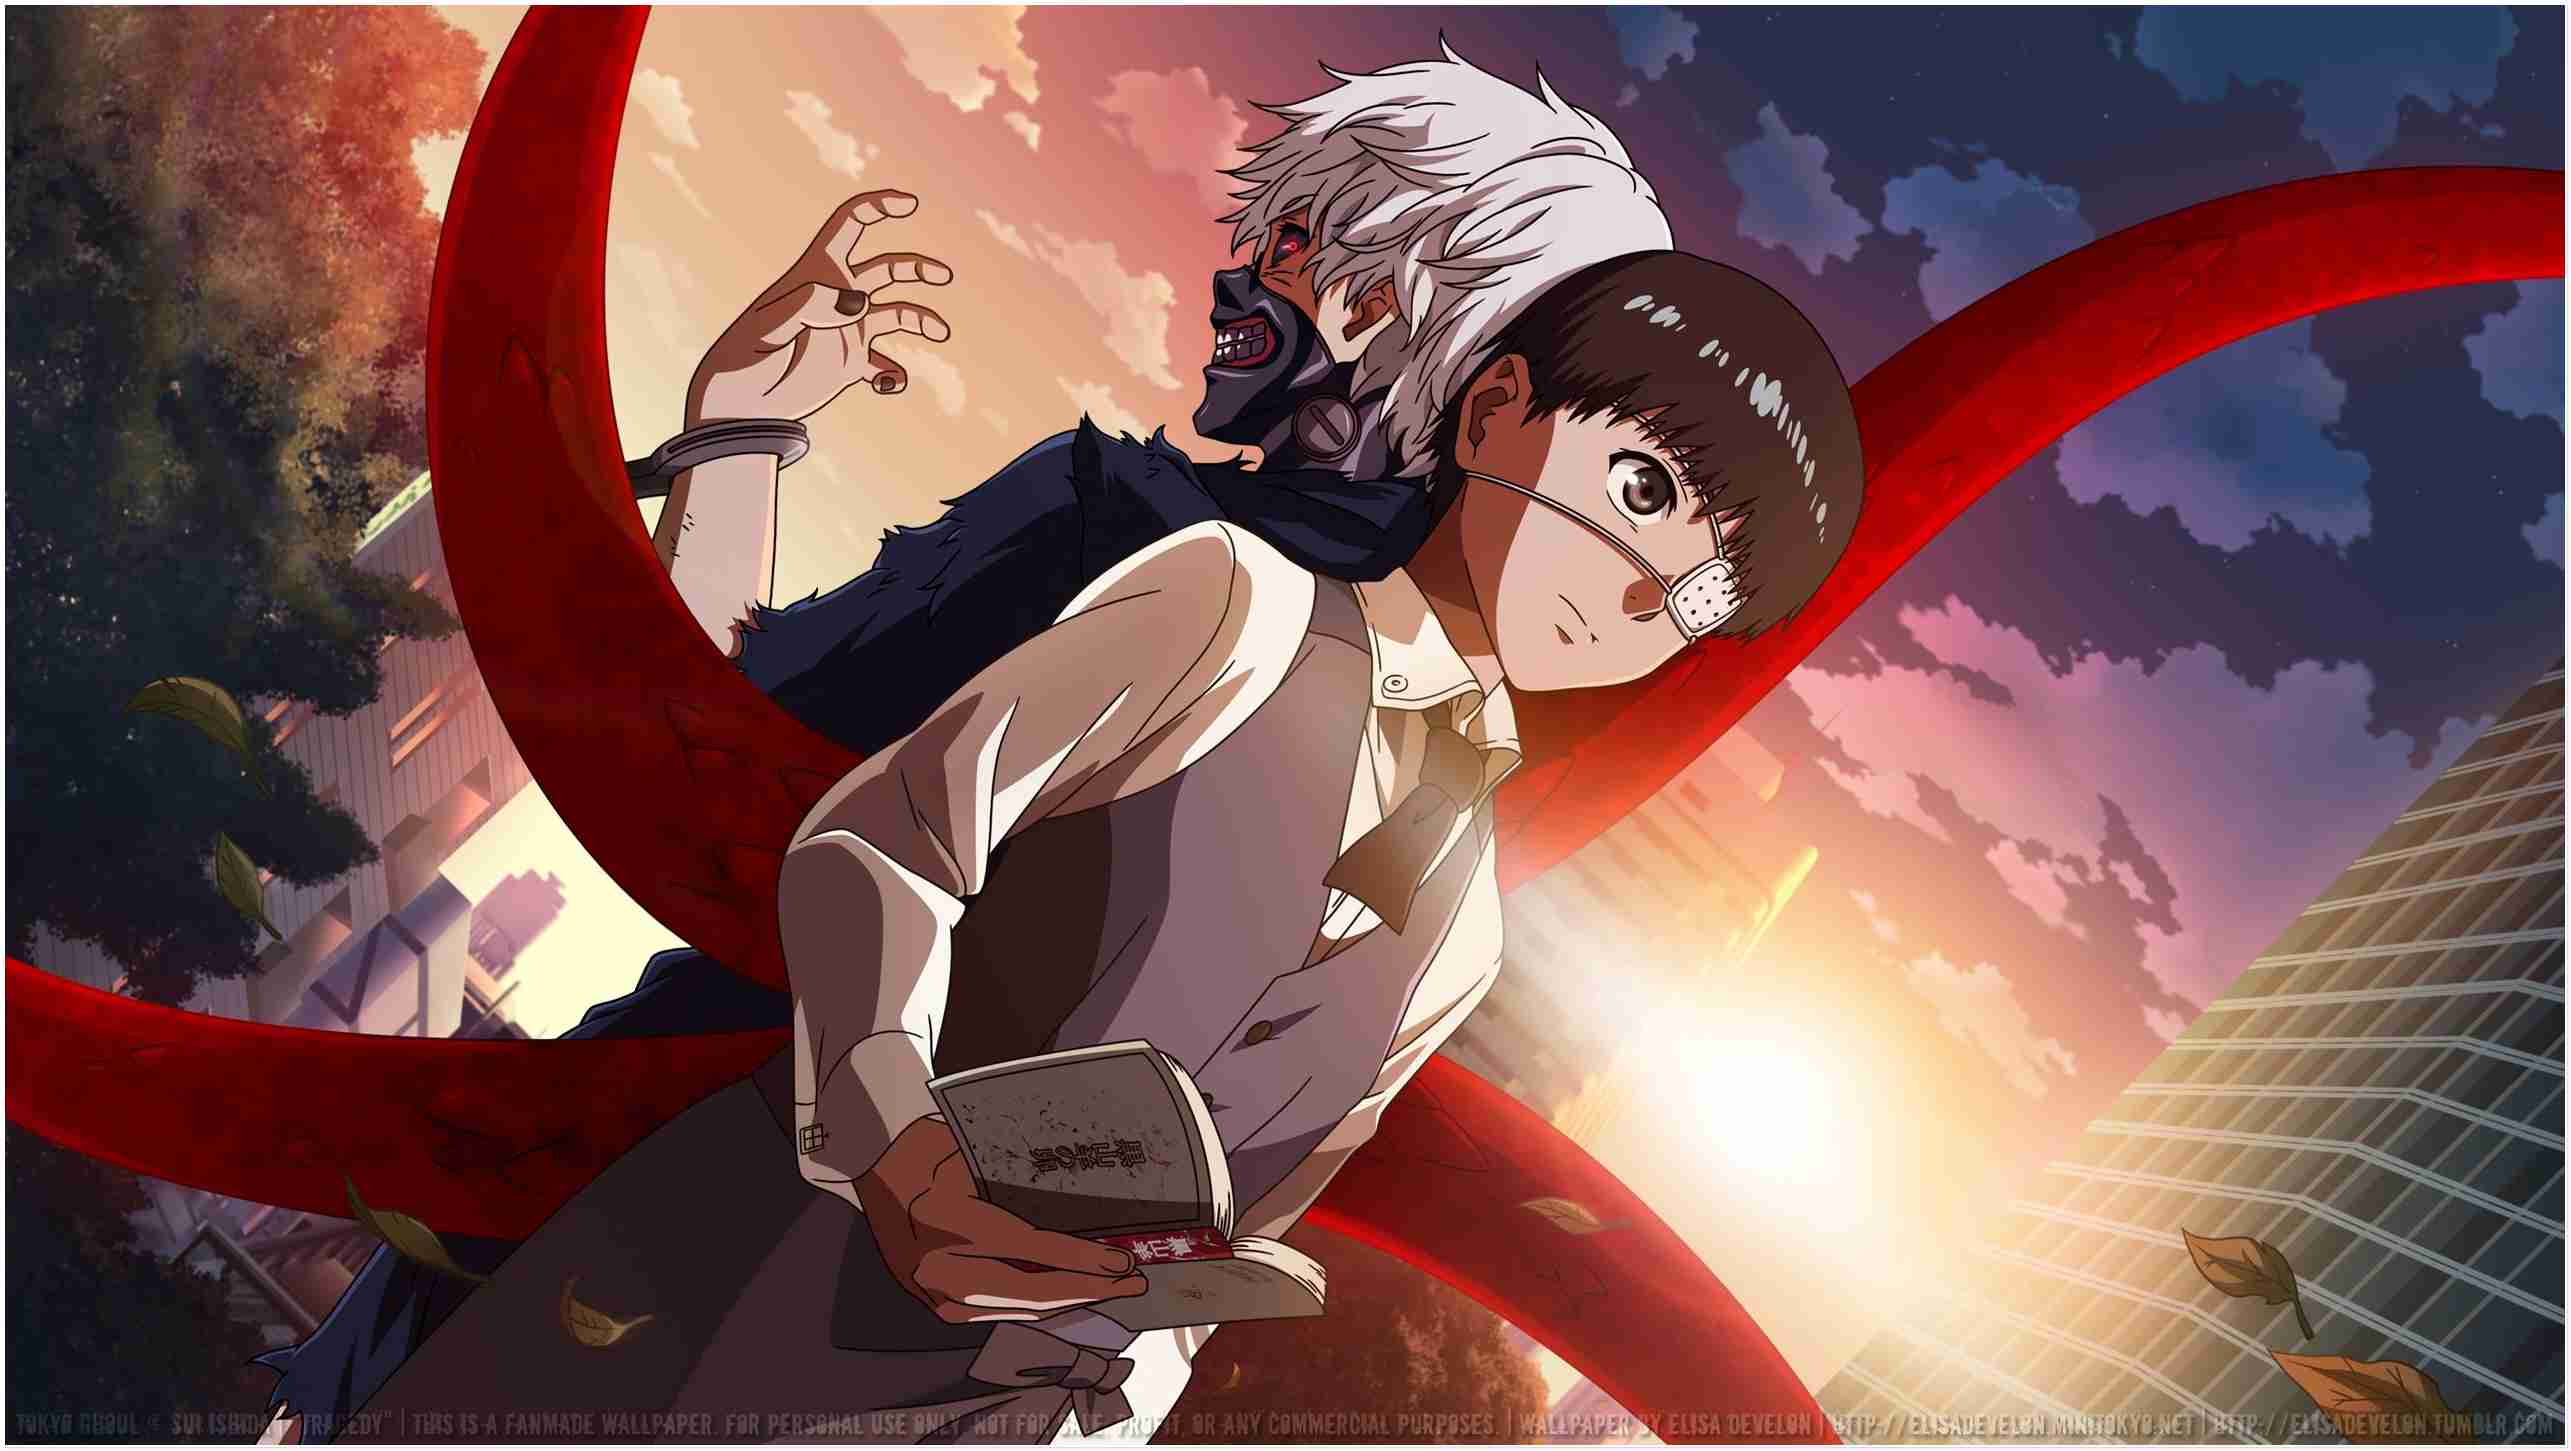 New 17 tokyo ghoul wallpaper latest Update Wallpaper Wise